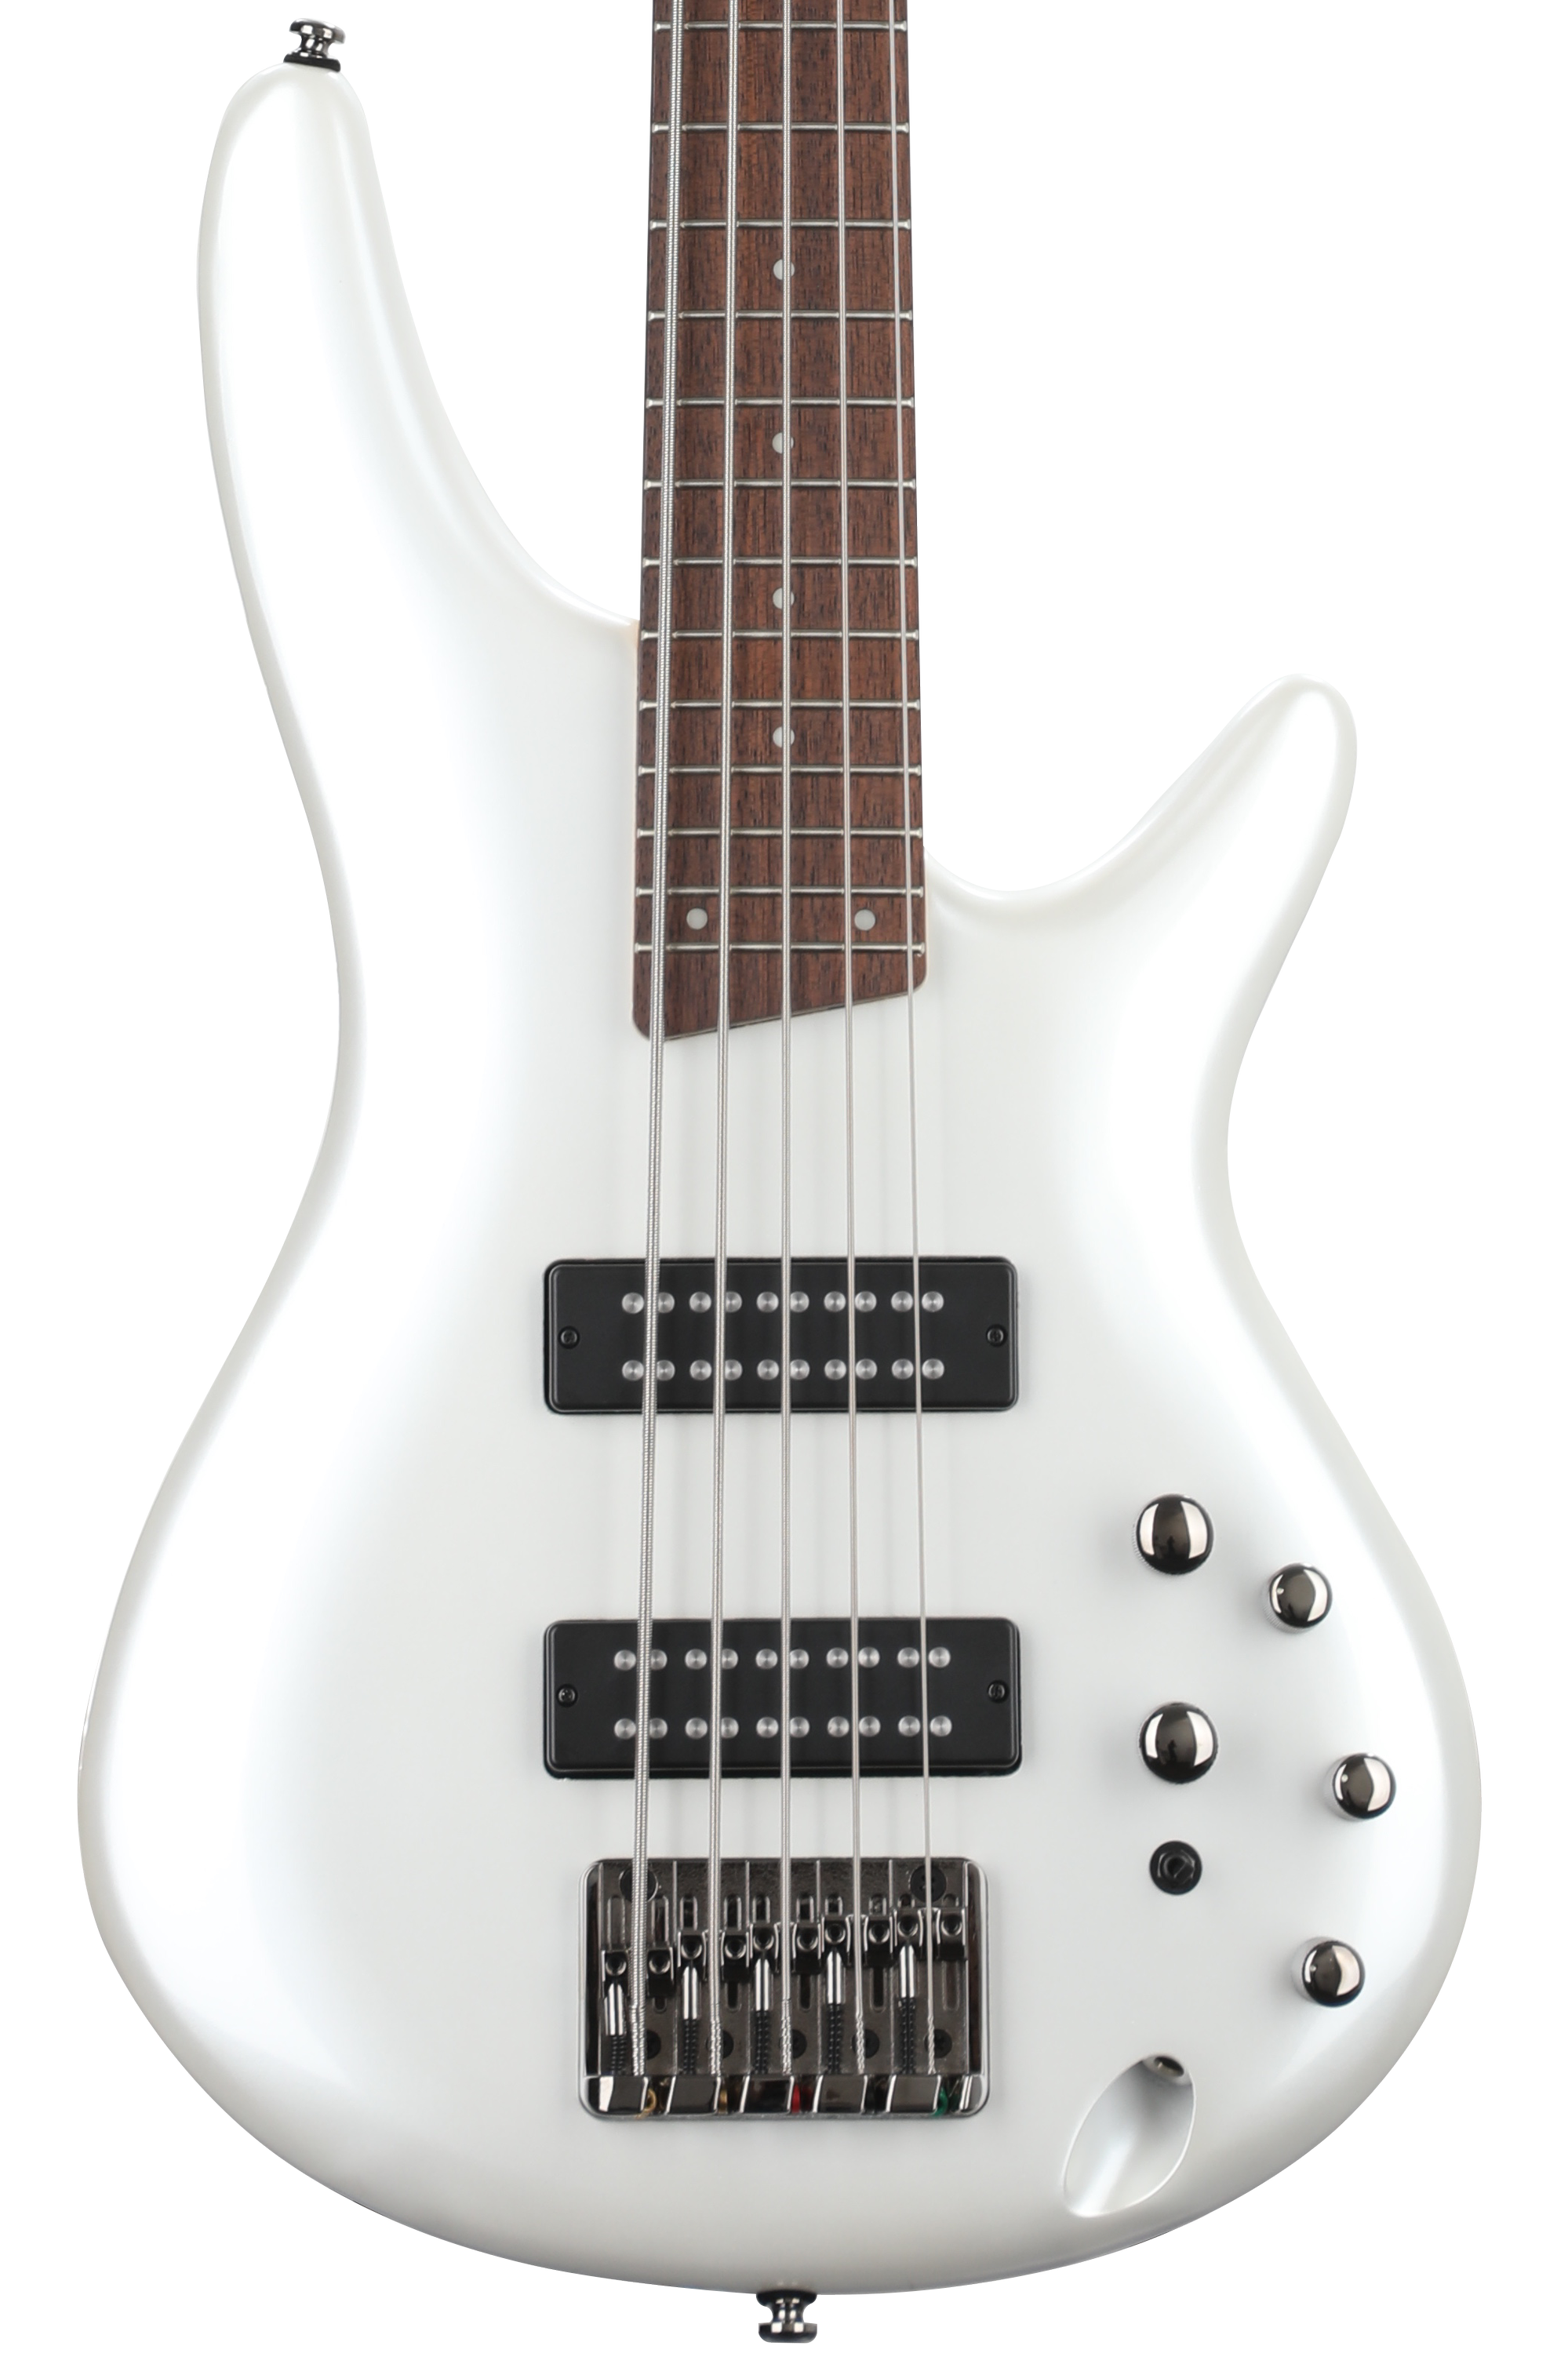 Ibanez Standard SR305E 5-string Bass Guitar - Pearl White | Sweetwater